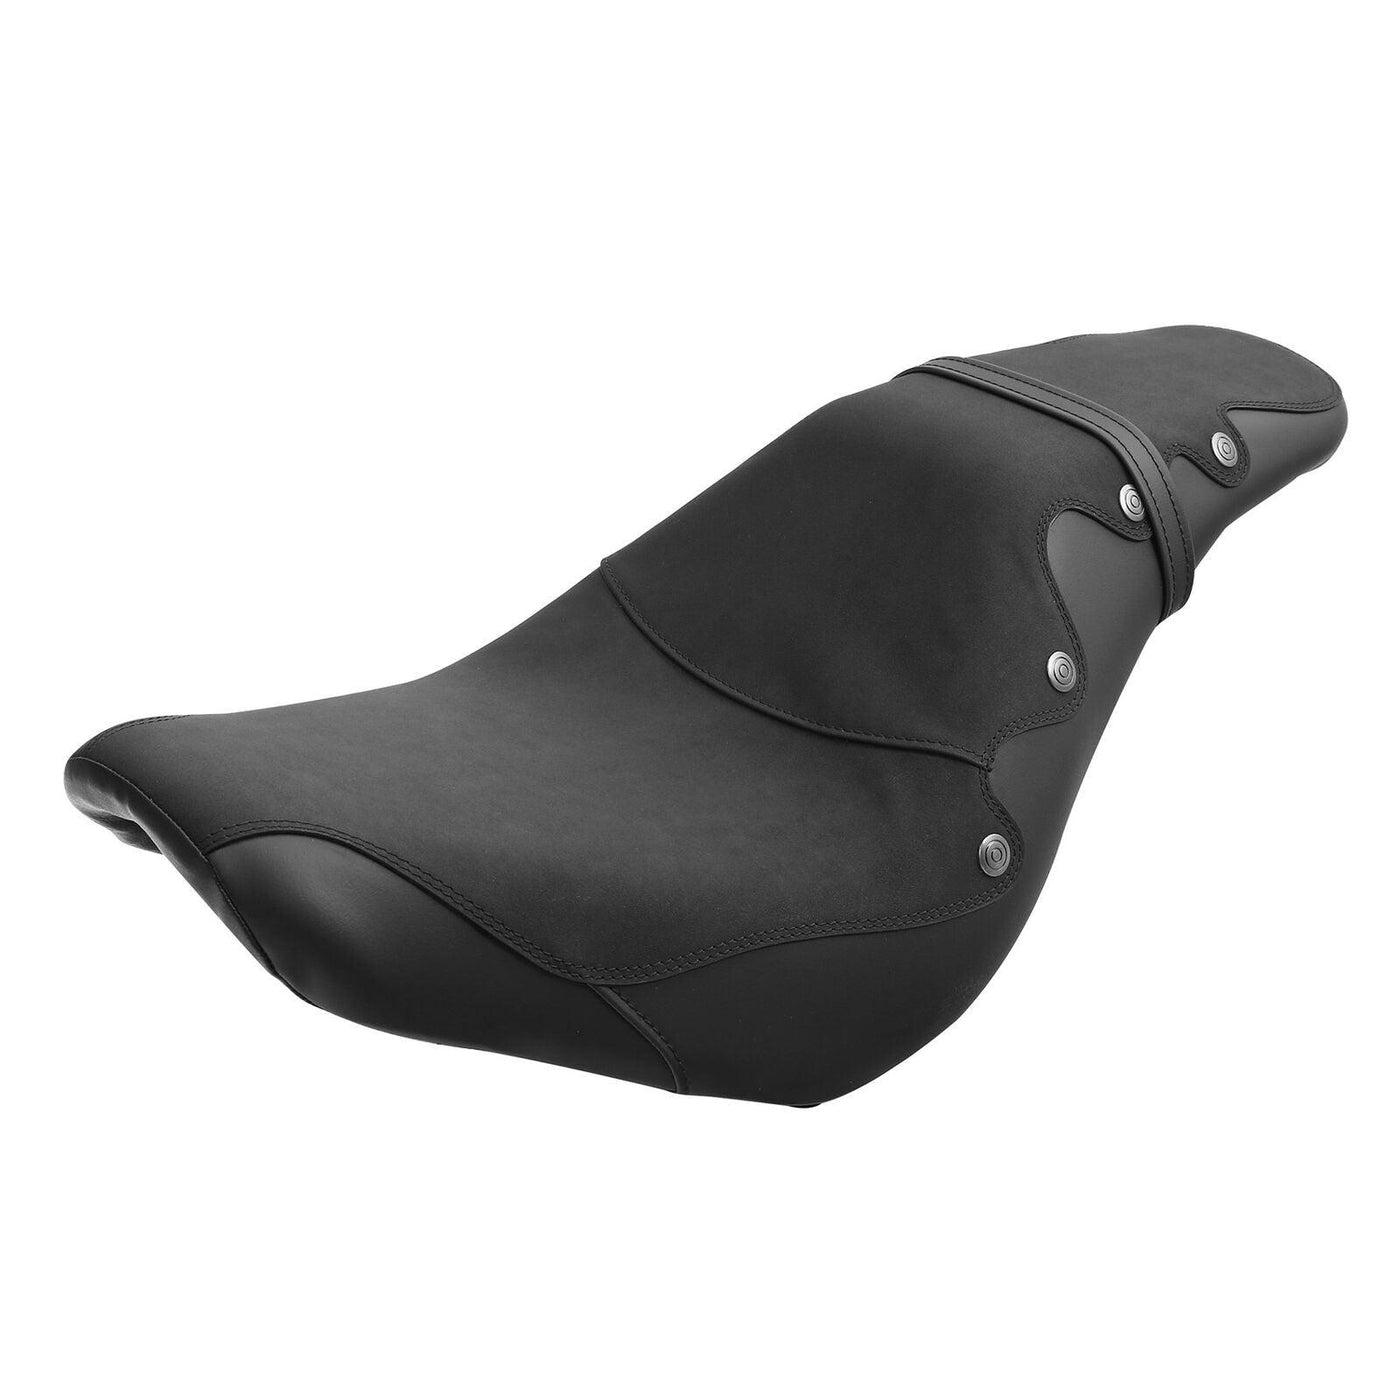 Driver Passenger Seat Fit For Harley Softail Deluxe FLDE Street Bob FXBB 2018-Up - Moto Life Products